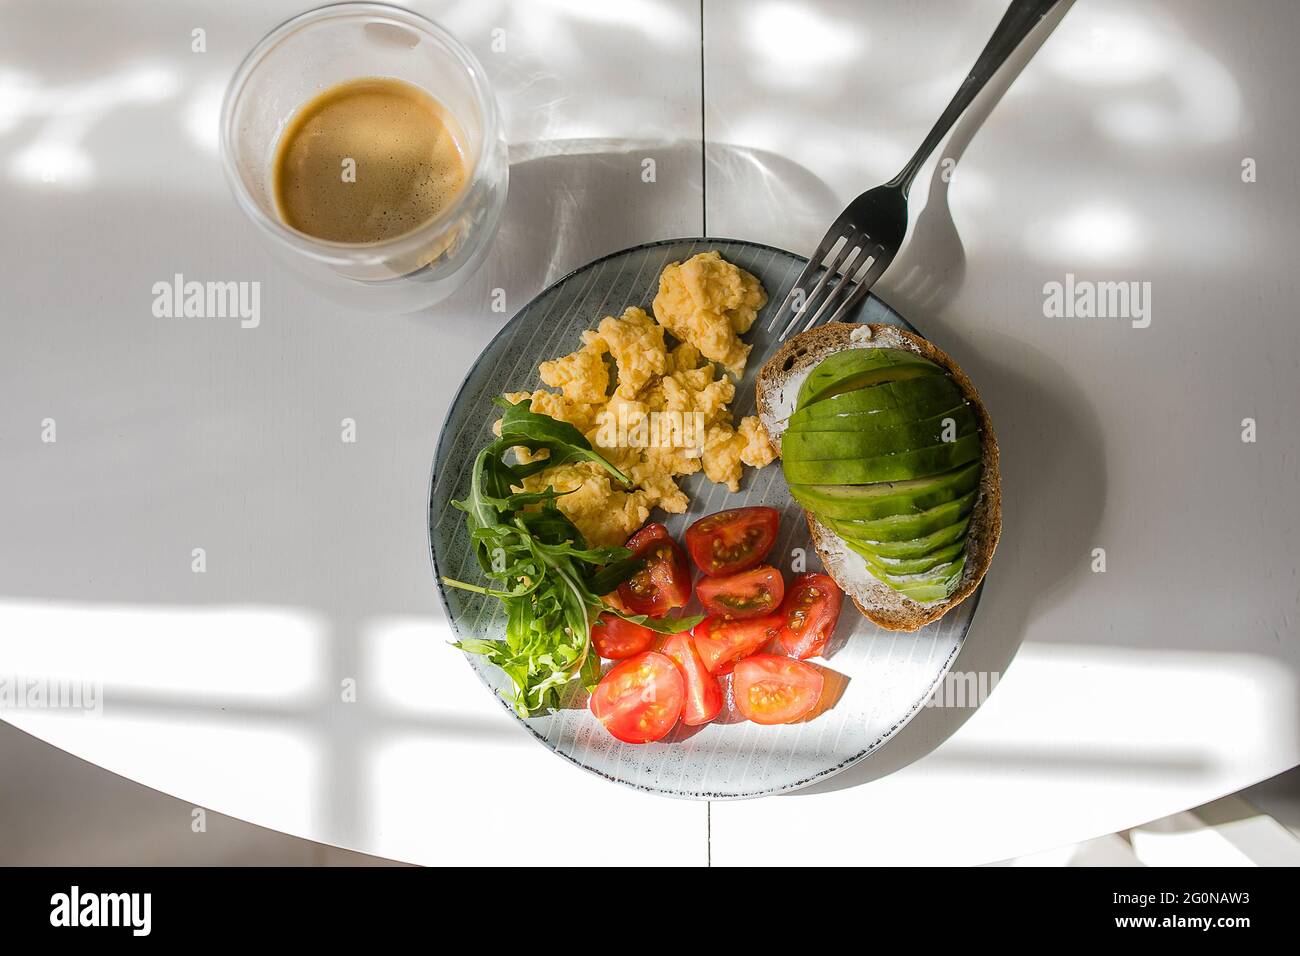 Plate with scrambled eggs, arugula, tomato, whole wheat toast with avocado, cup of coffee on table. Stock Photo